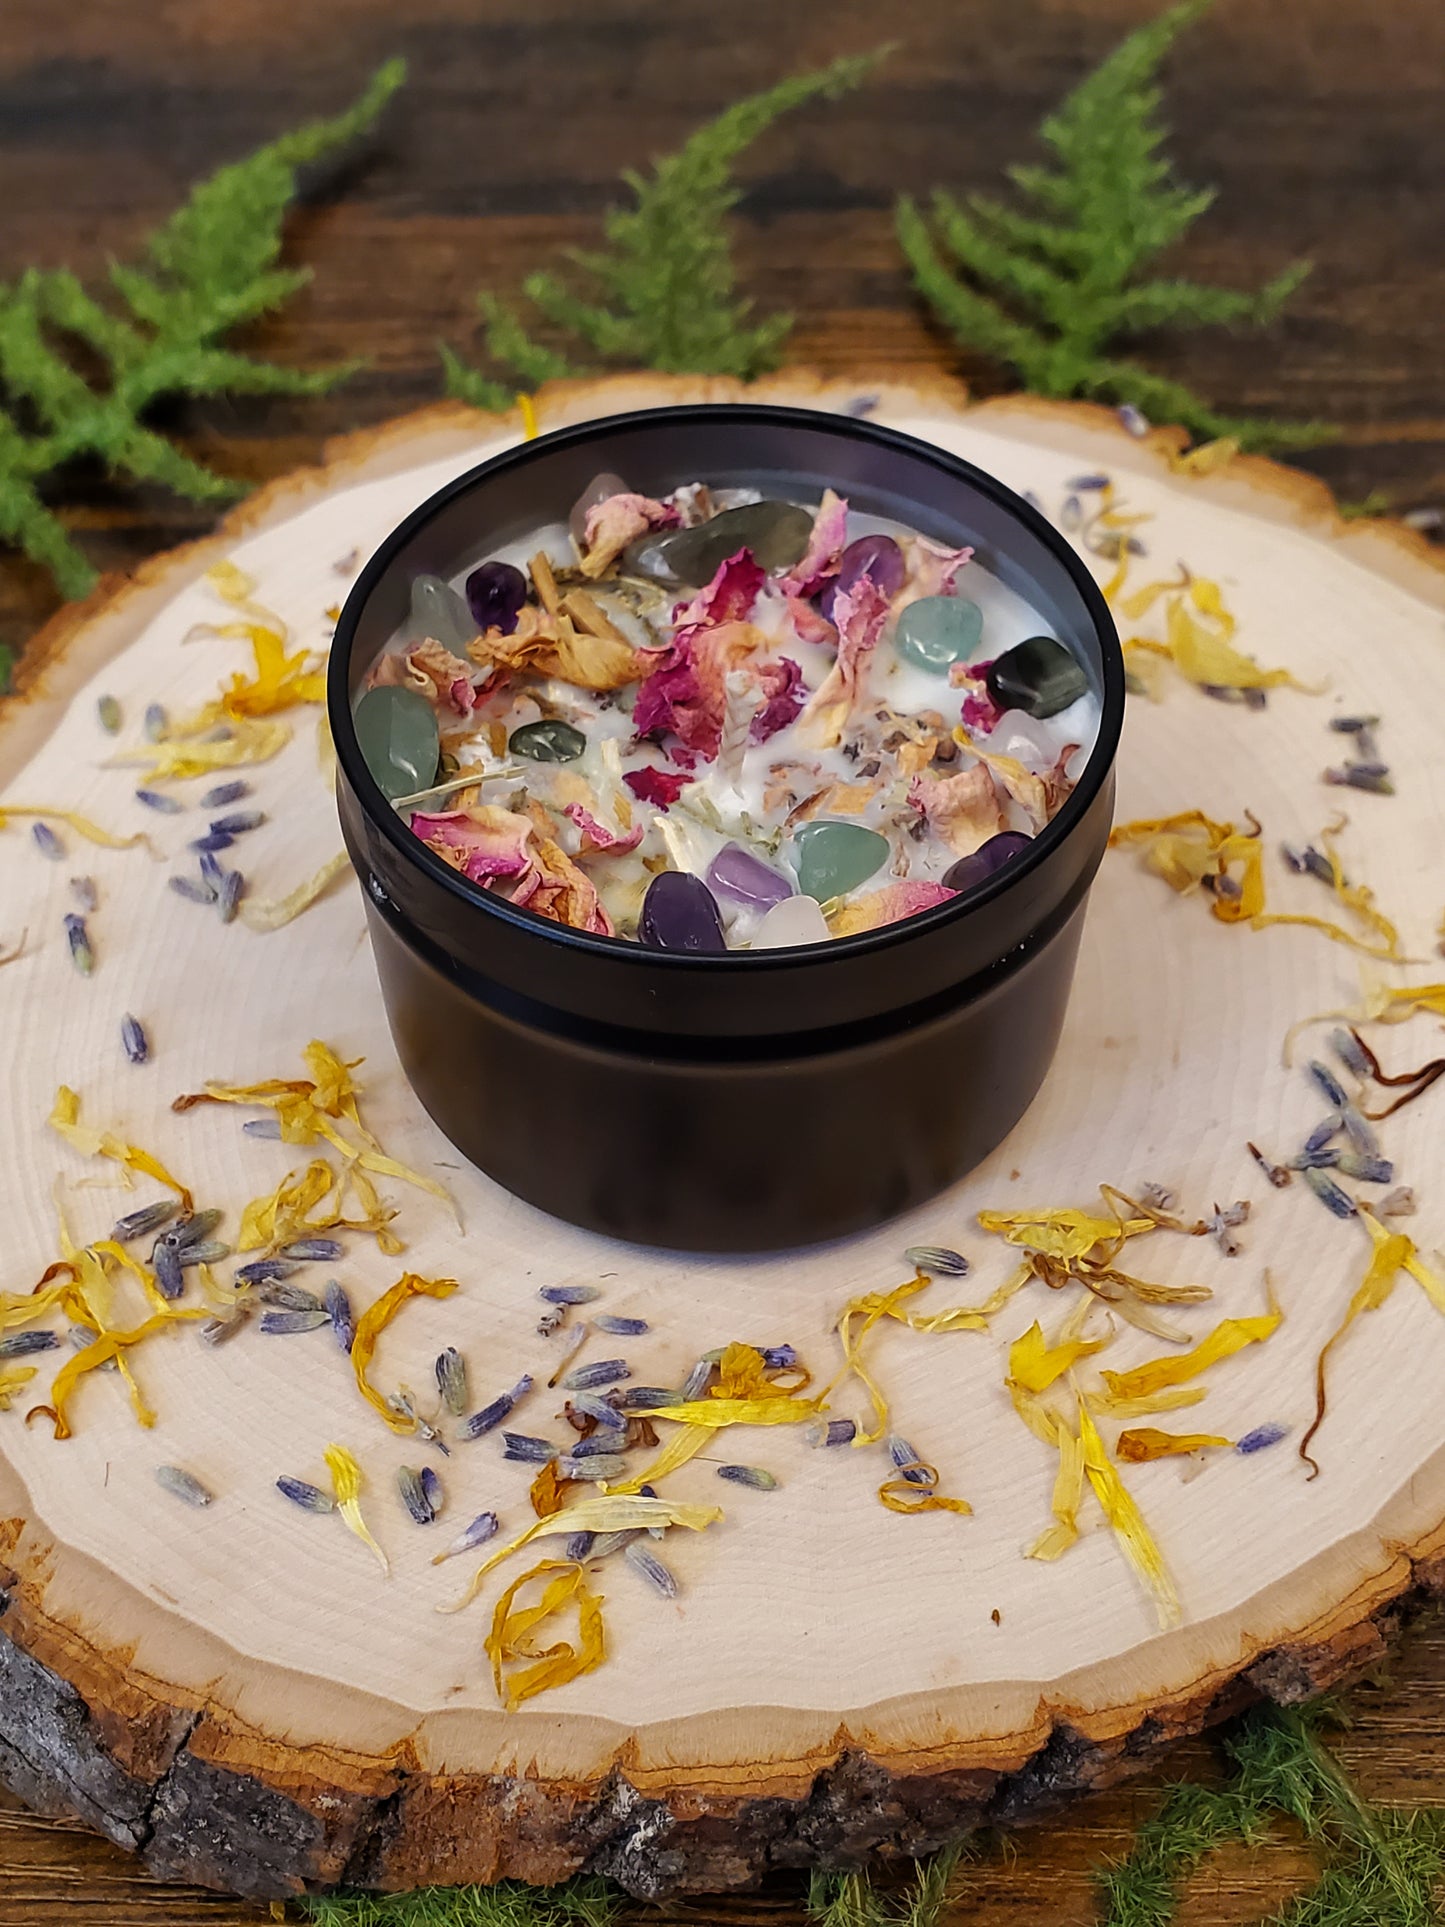 Healing Intention Candle